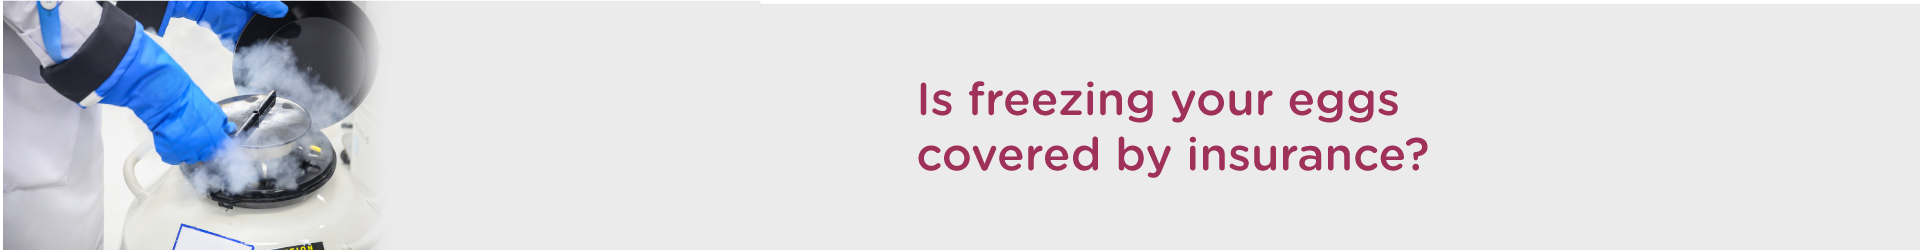 Is Freezing Your Eggs Covered by Insurance?